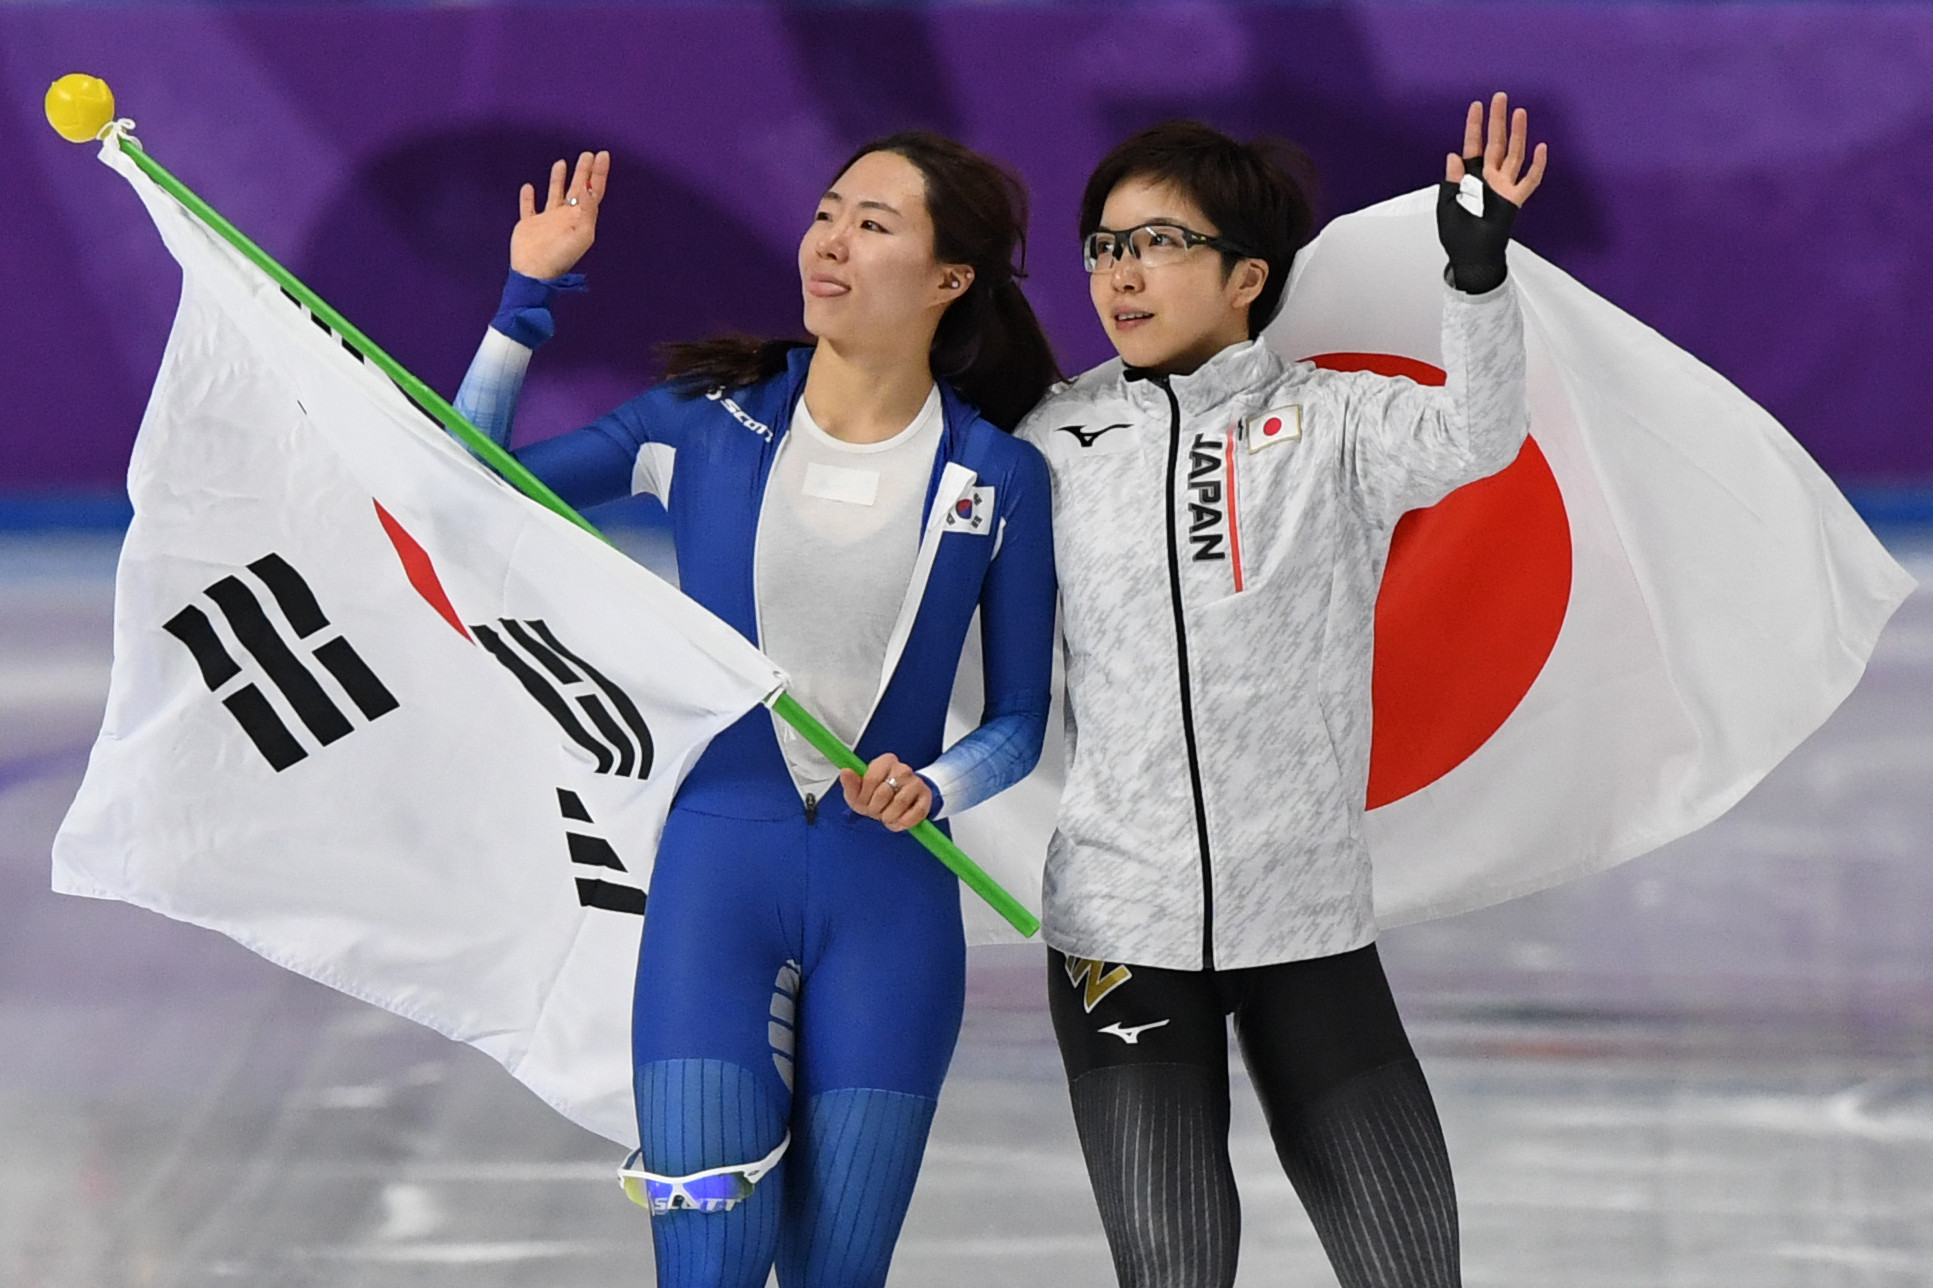 Japan's Nao Kodaira and South Korea's Lee Sang-hwa pose together after the 500m competition ©Getty Images